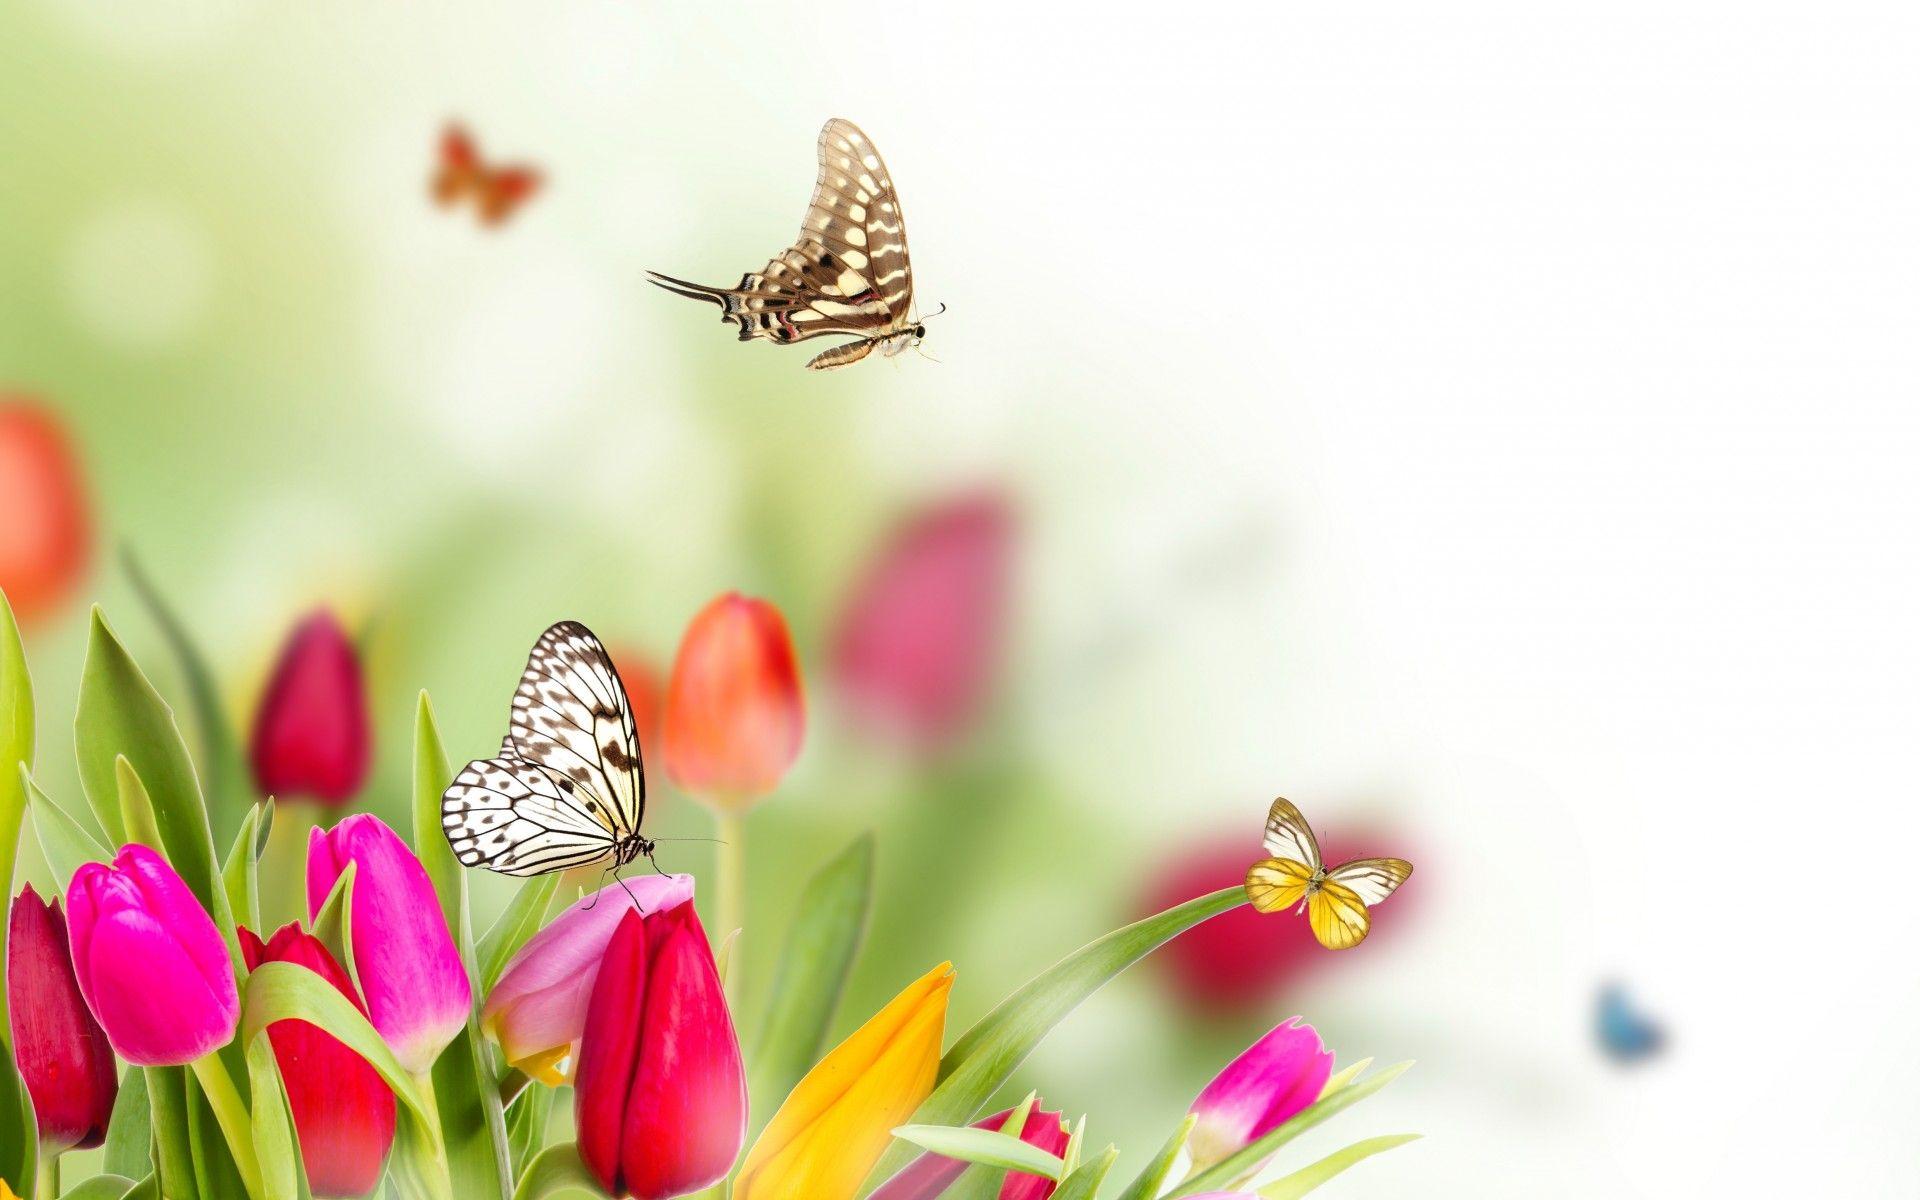 Spring Background free download. HD Wallpaper, Image, Background, Art Photo. Spring wallpaper, Spring flowers wallpaper, Flower background wallpaper